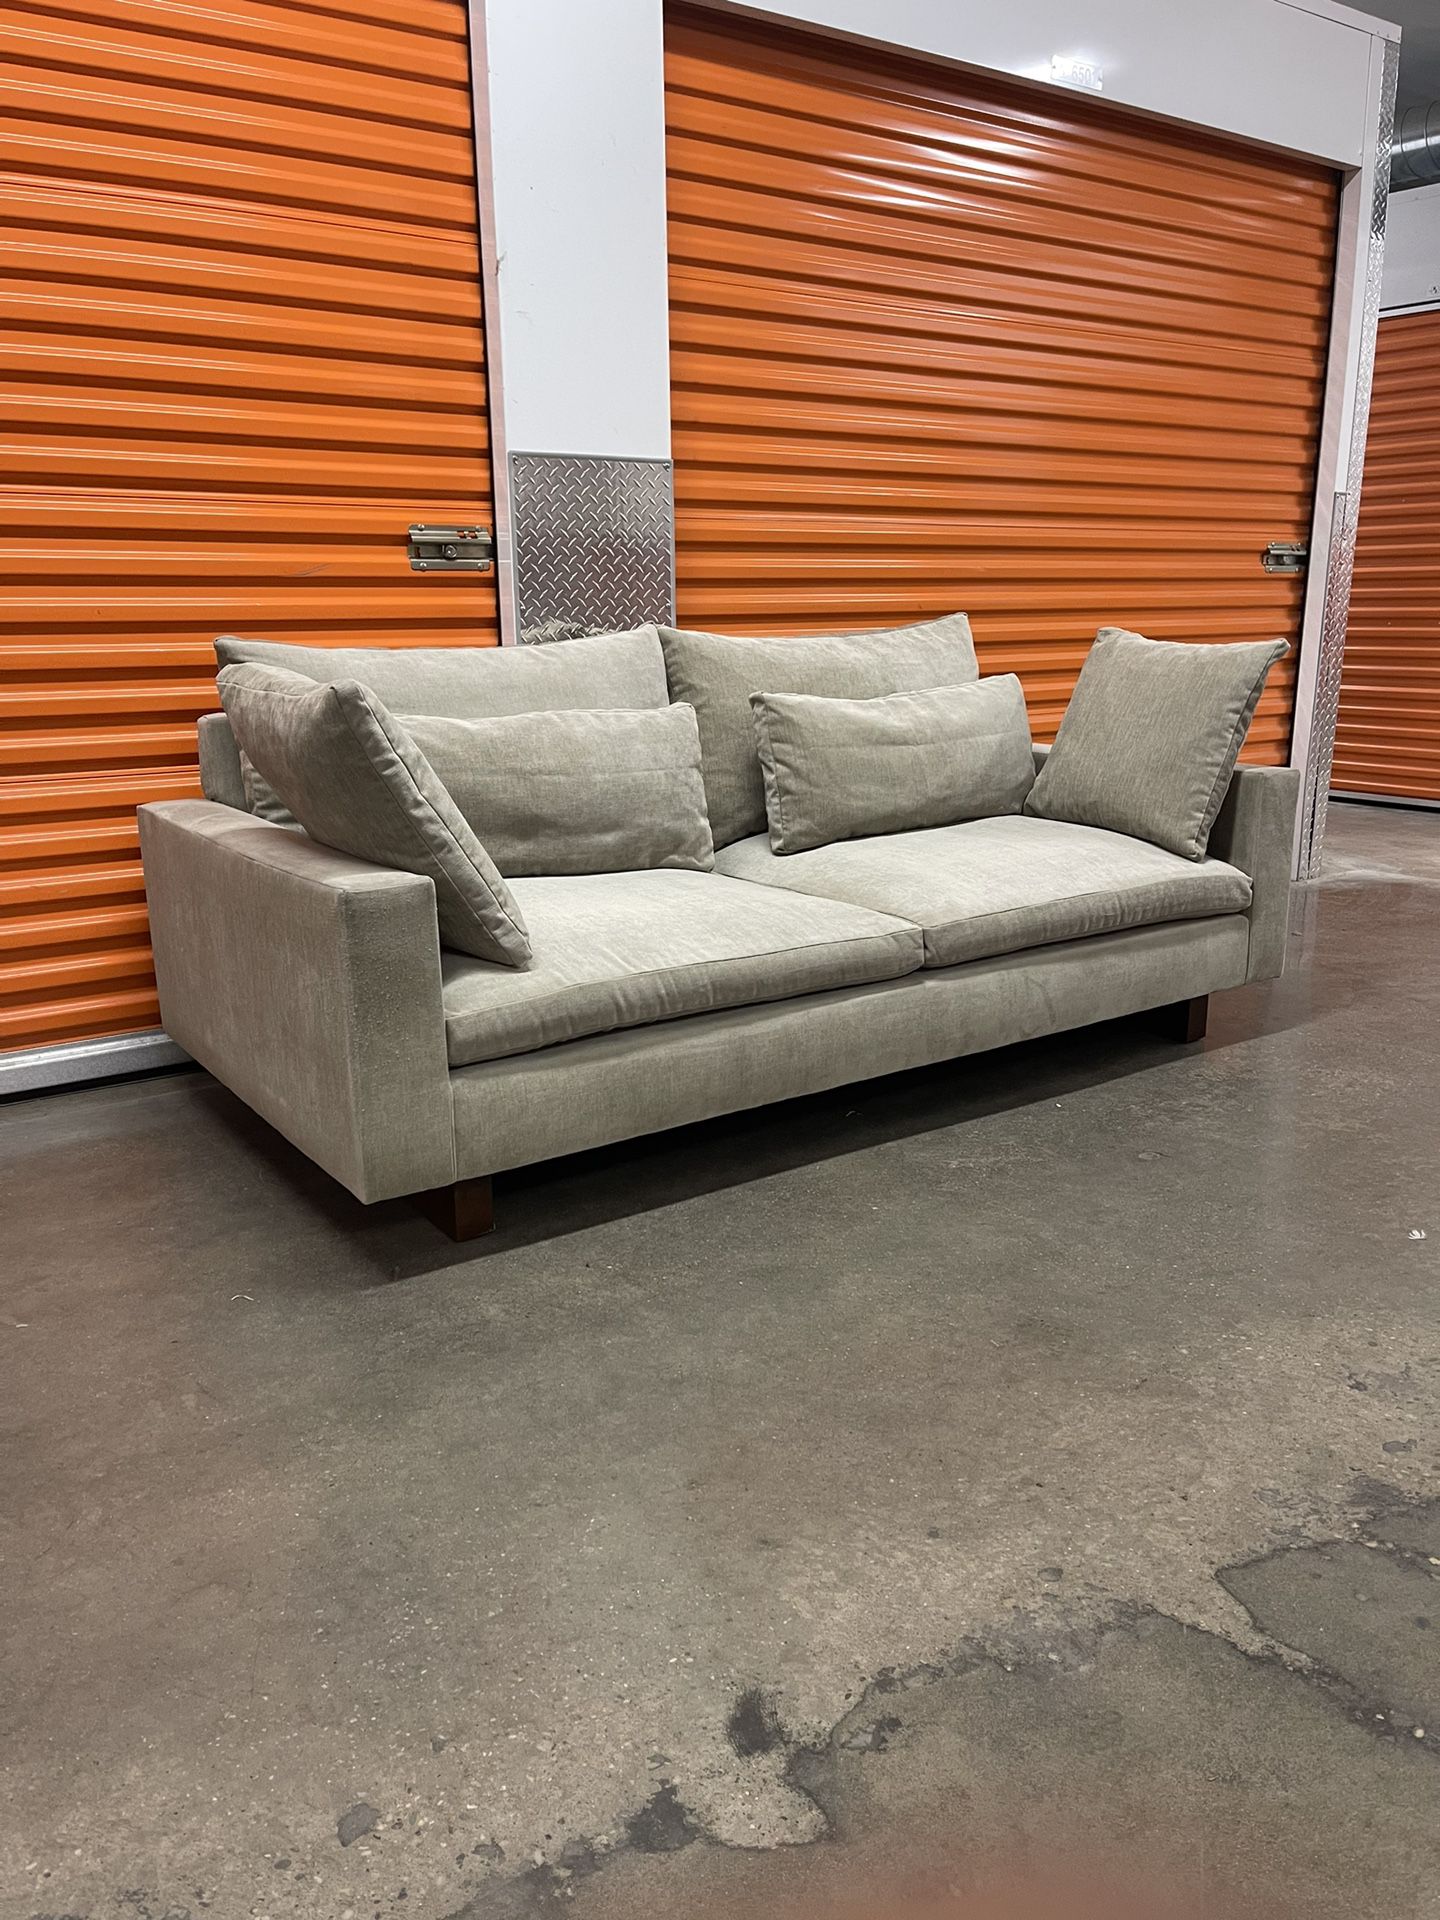 West Elm 82” Harmony Sofa Couch | FREE DELIVERY | NYC 🚛